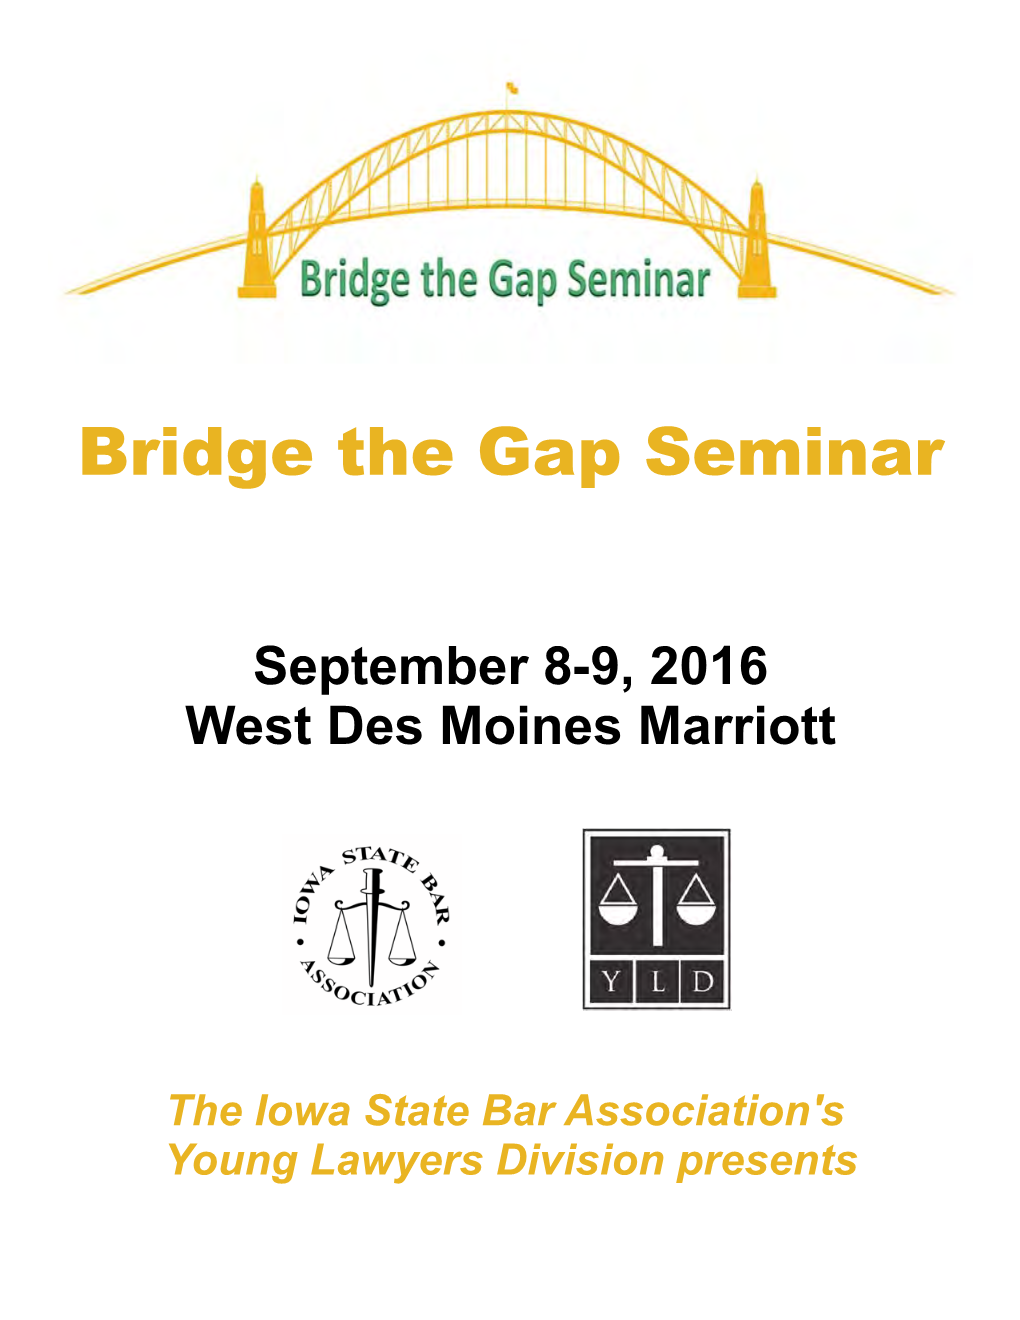 The Iowa State Bar Association's Young Lawyers Division Presents